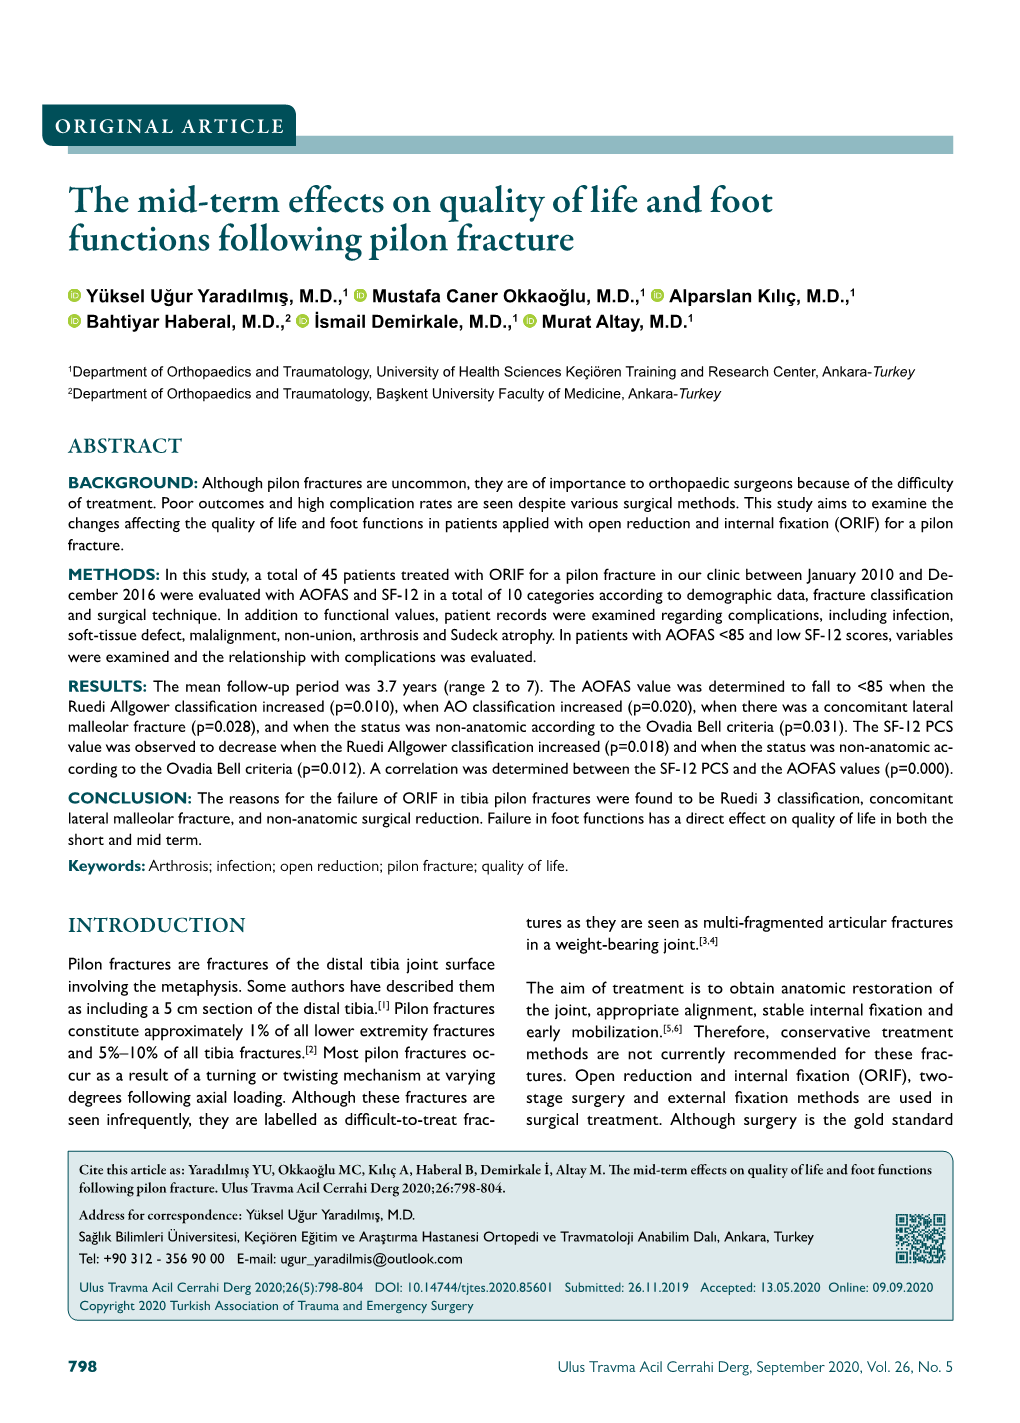 The Mid-Term Effects on Quality of Life and Foot Functions Following Pilon Fracture